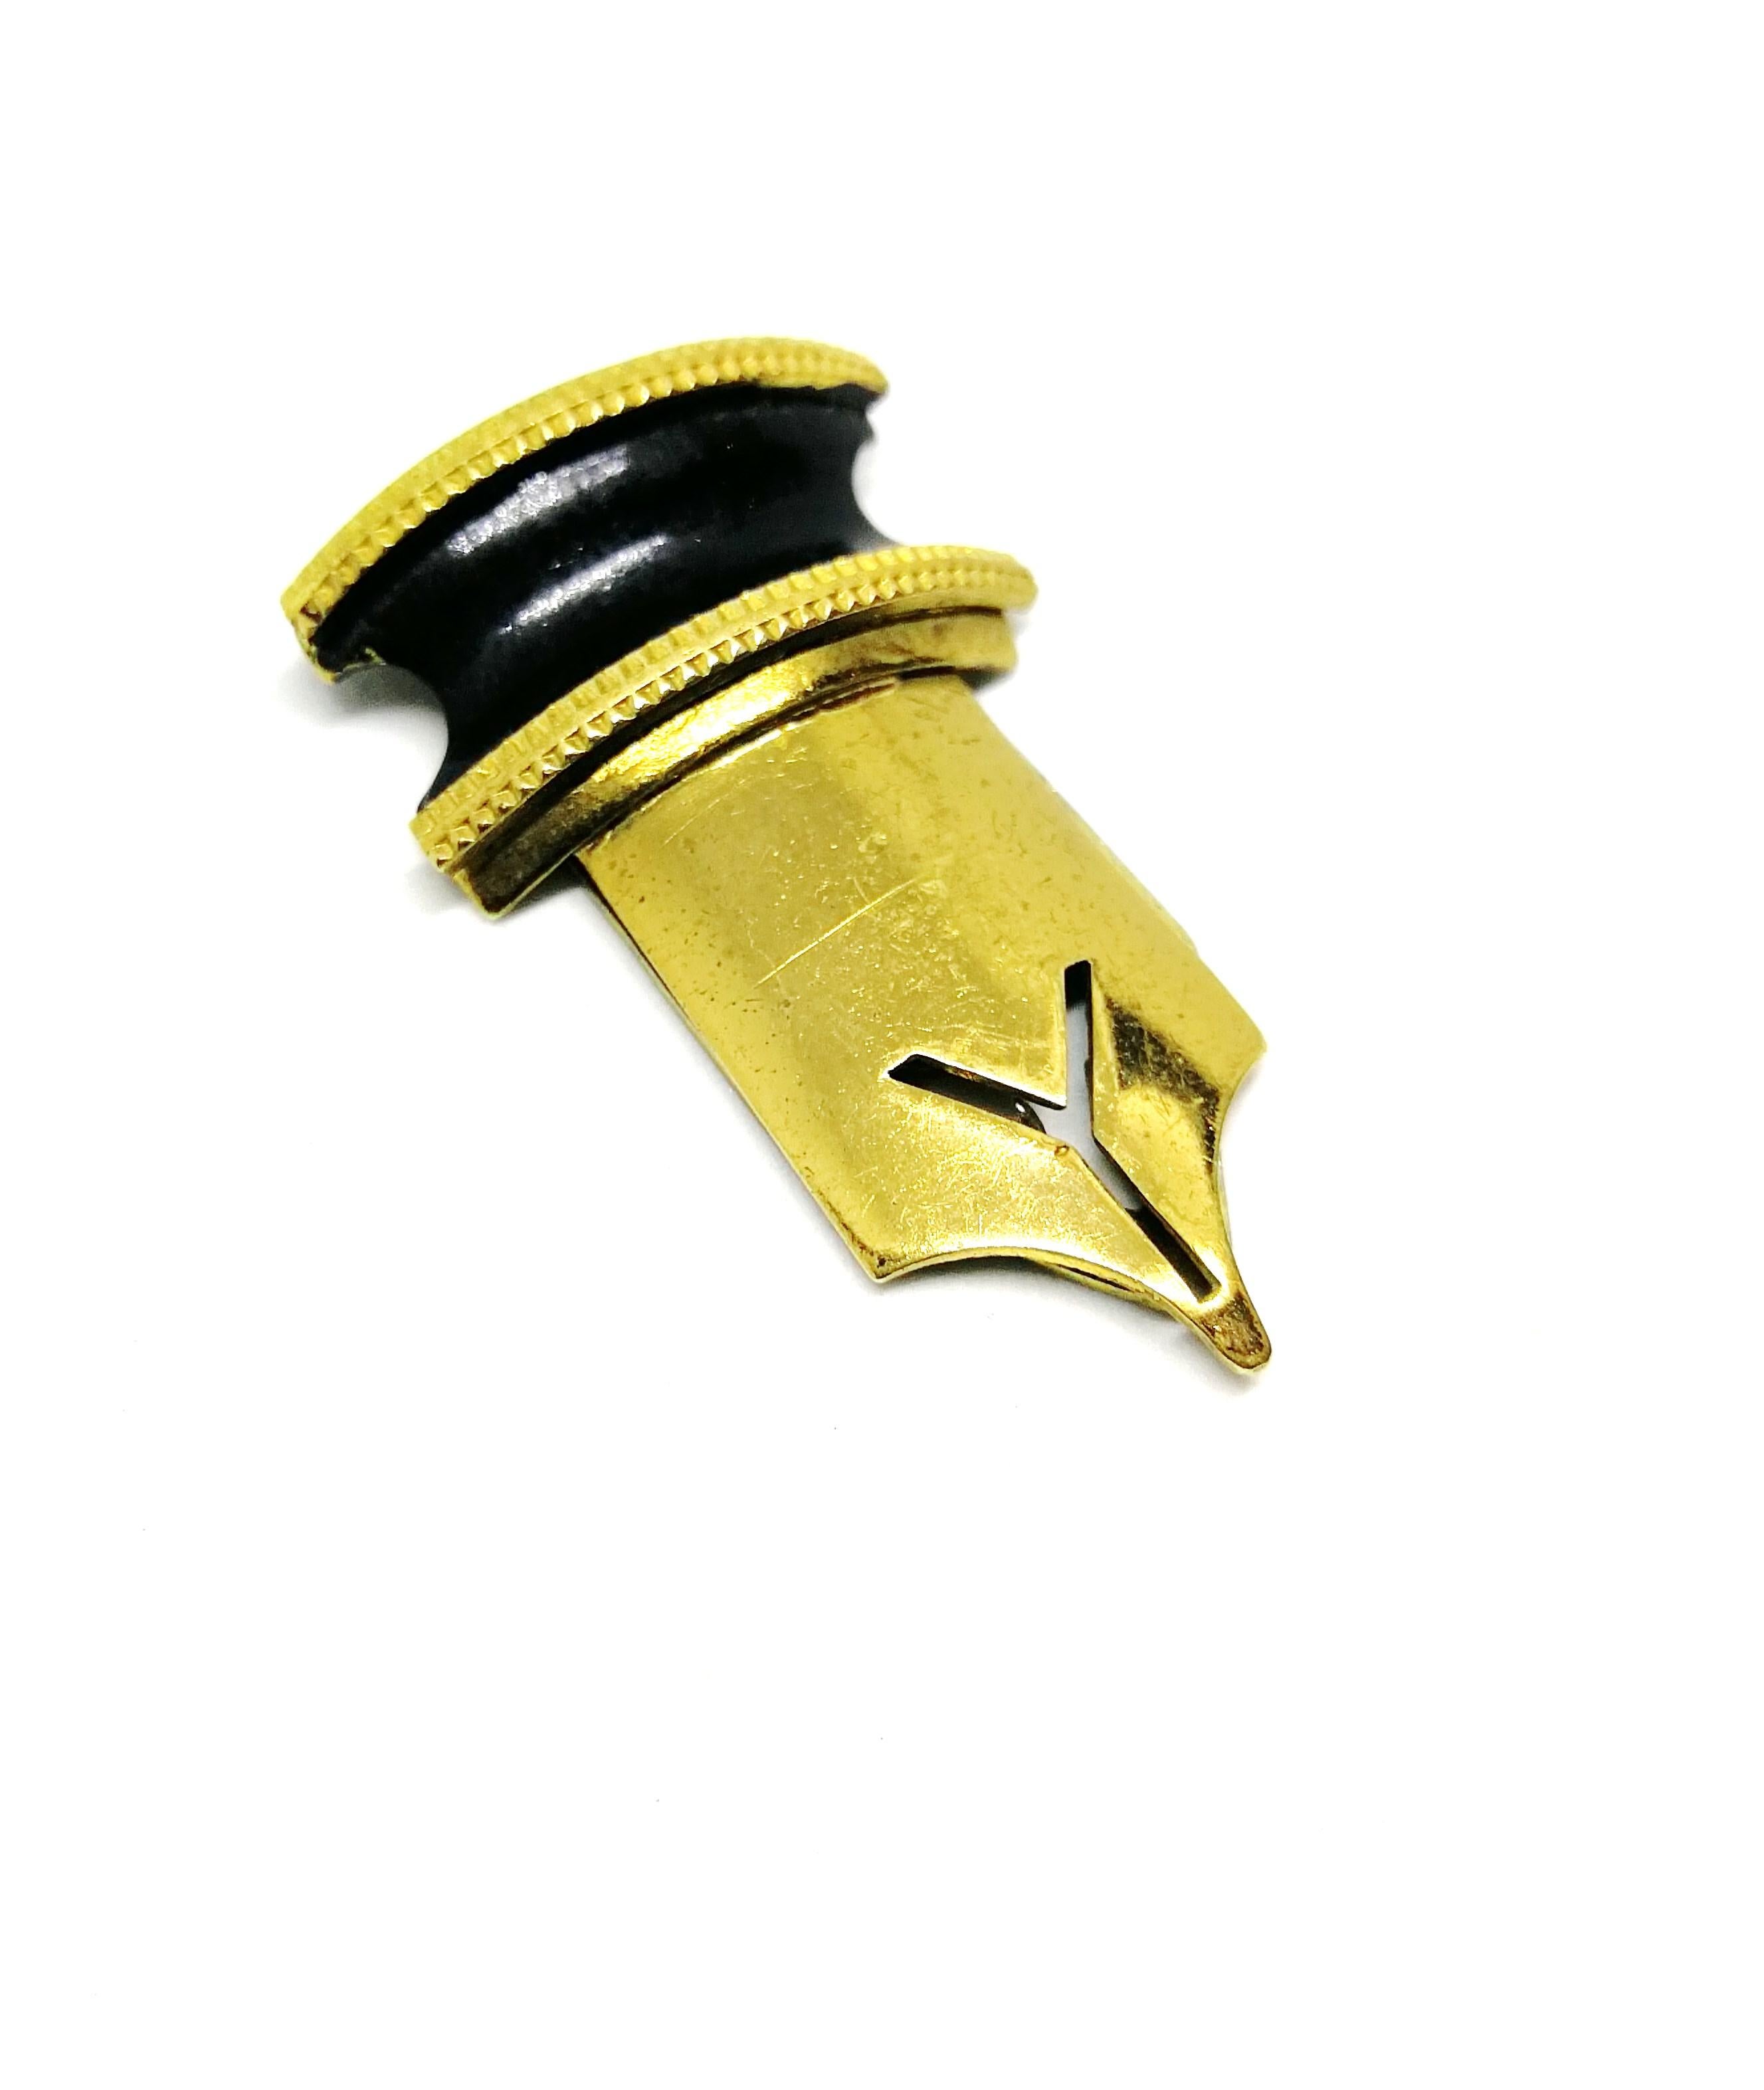 A quirky but beautifully crafted clip from the 1940s in the form of a nib, or pen nib, attributed to the famous manufacturer, Monet.
Smart and unusual, with a firm grip when attached to a pocket, neckline or lapels, this is the ideal gift for a